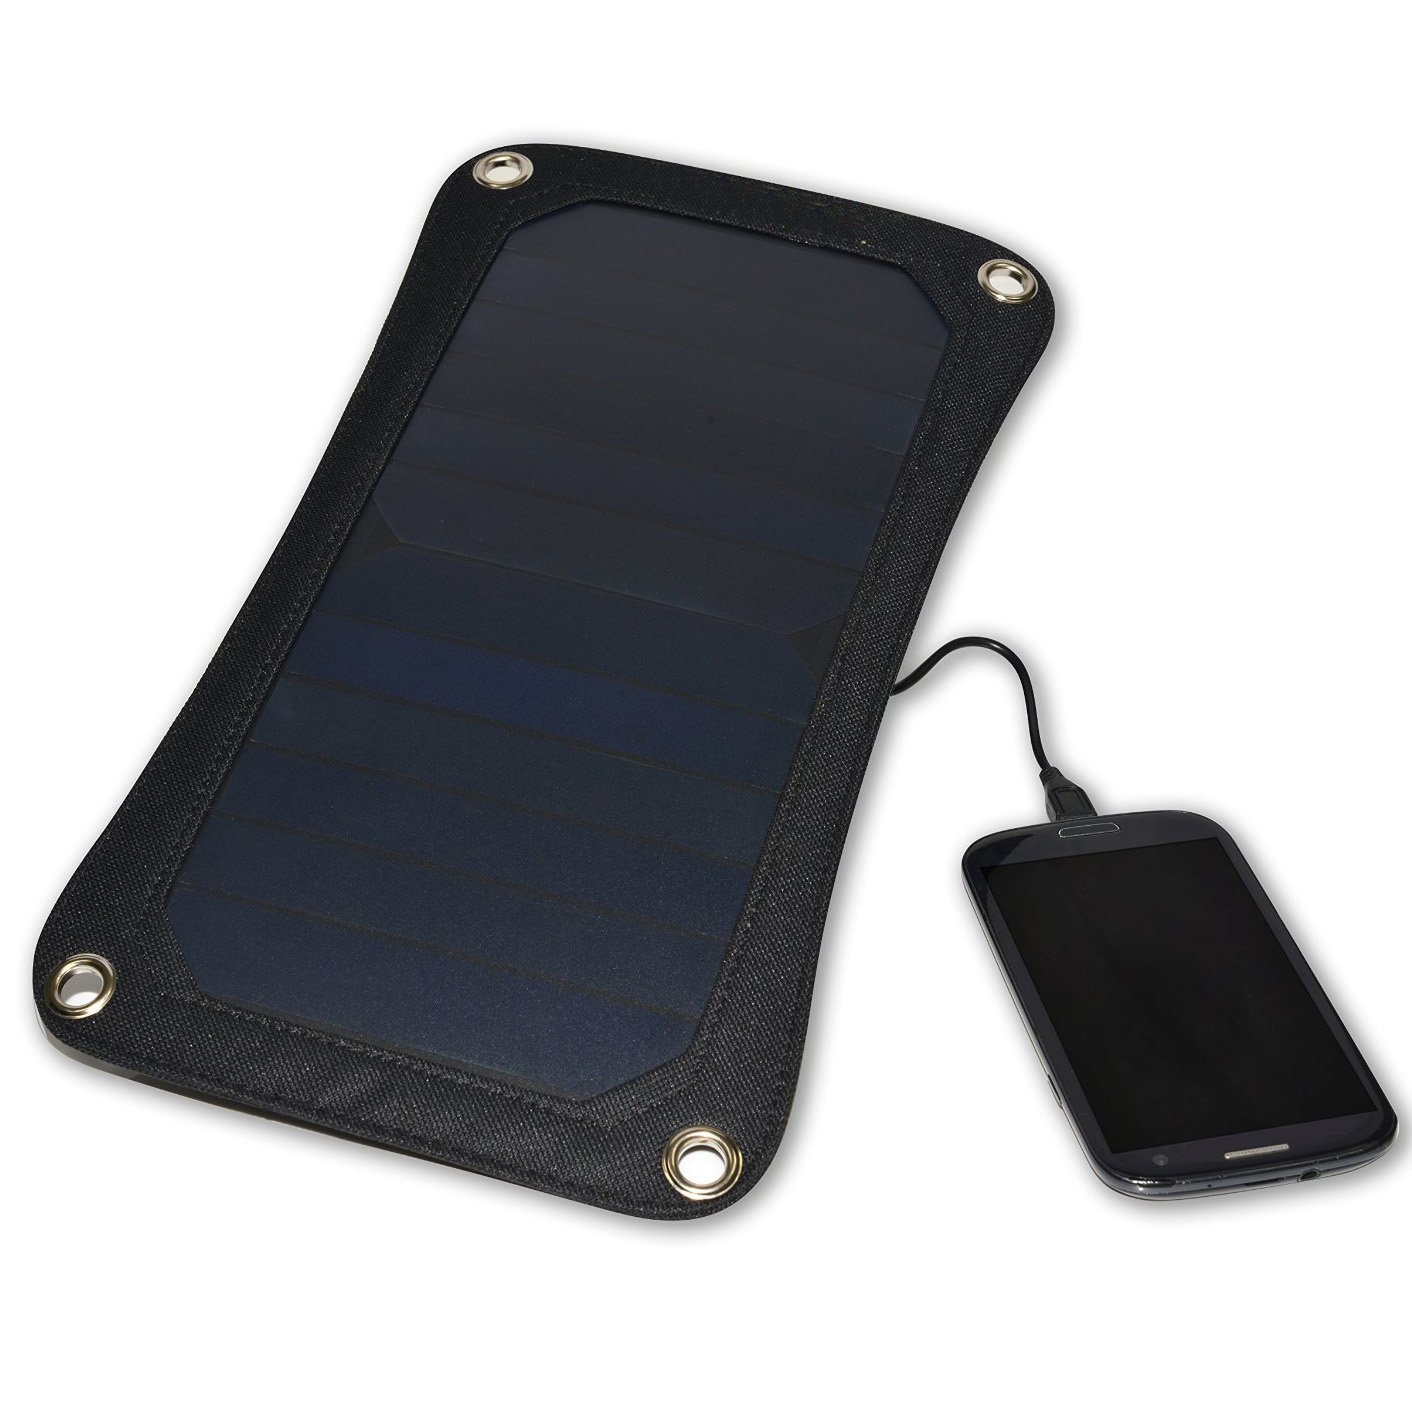 Solar Panel Charging Board Portable Outdoor Travel Charging Mobile Phone 5V2AUSB Charger E-commerce Excellent